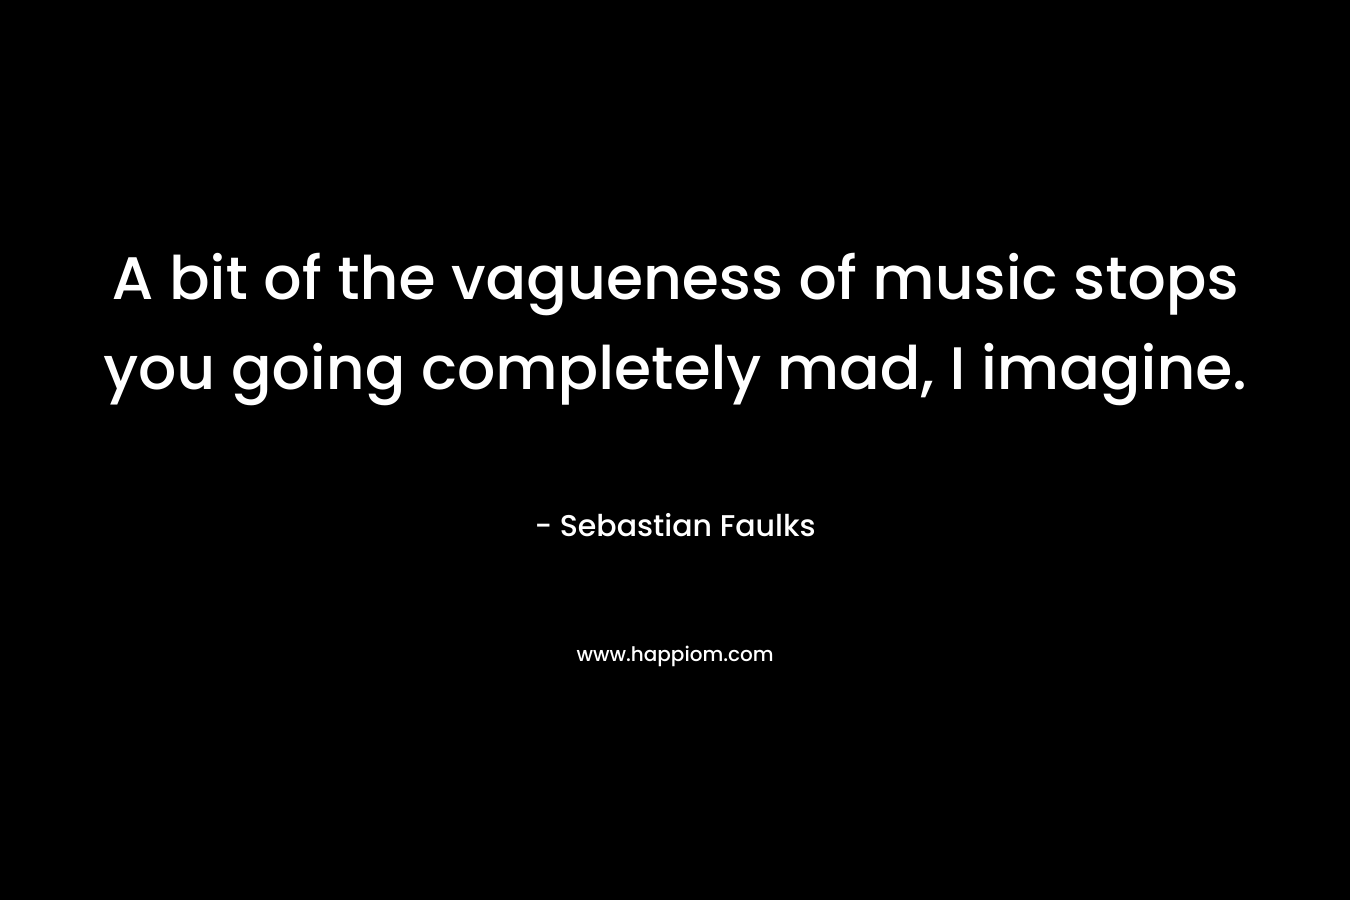 A bit of the vagueness of music stops you going completely mad, I imagine.